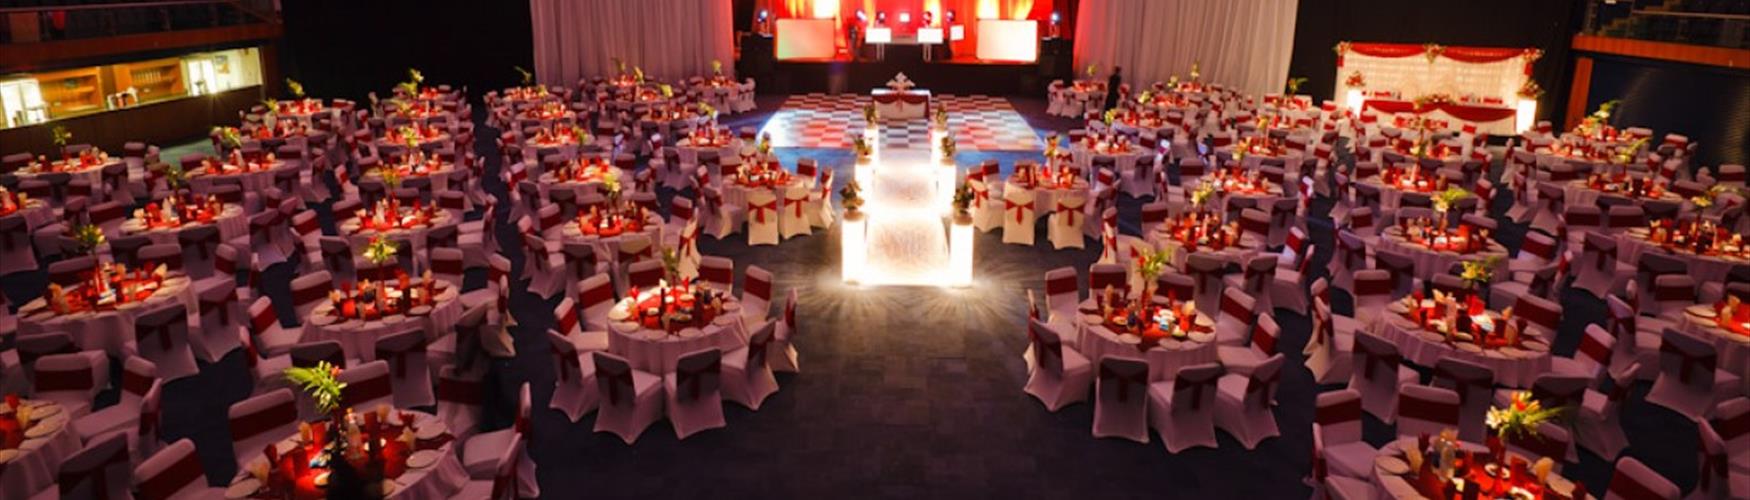 Gala dinner at The Centaur, Cheltenham Racecourse. A stage is set for a band to play behind a chequered dancefloor and round table decorated with flowers